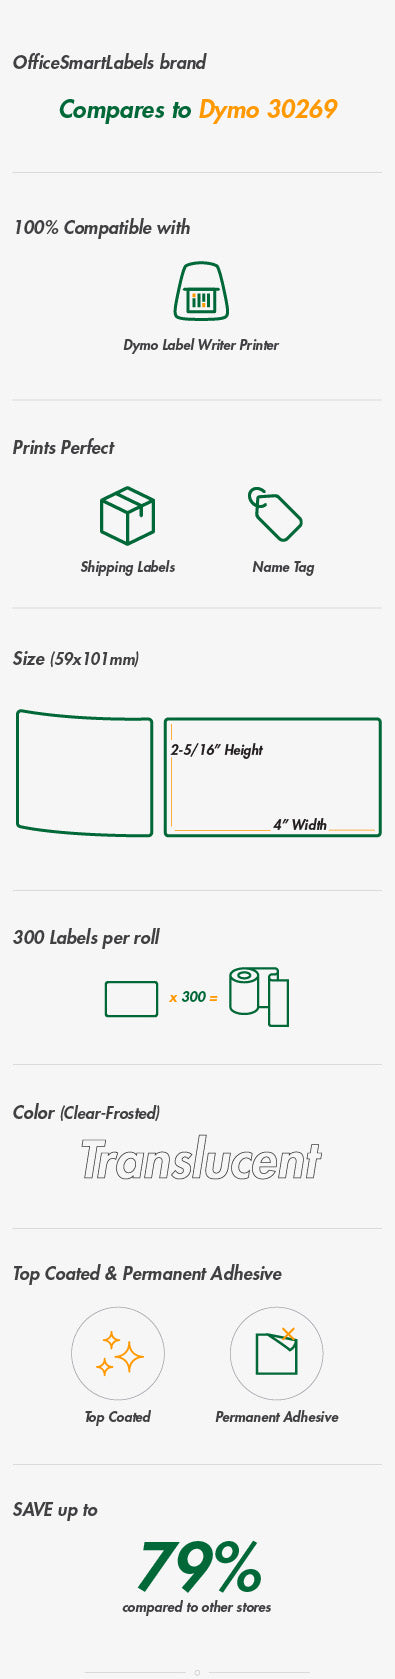 2-5/16 x 4 inch | Dymo 30269 Compatible - Translucent Shipping Labels